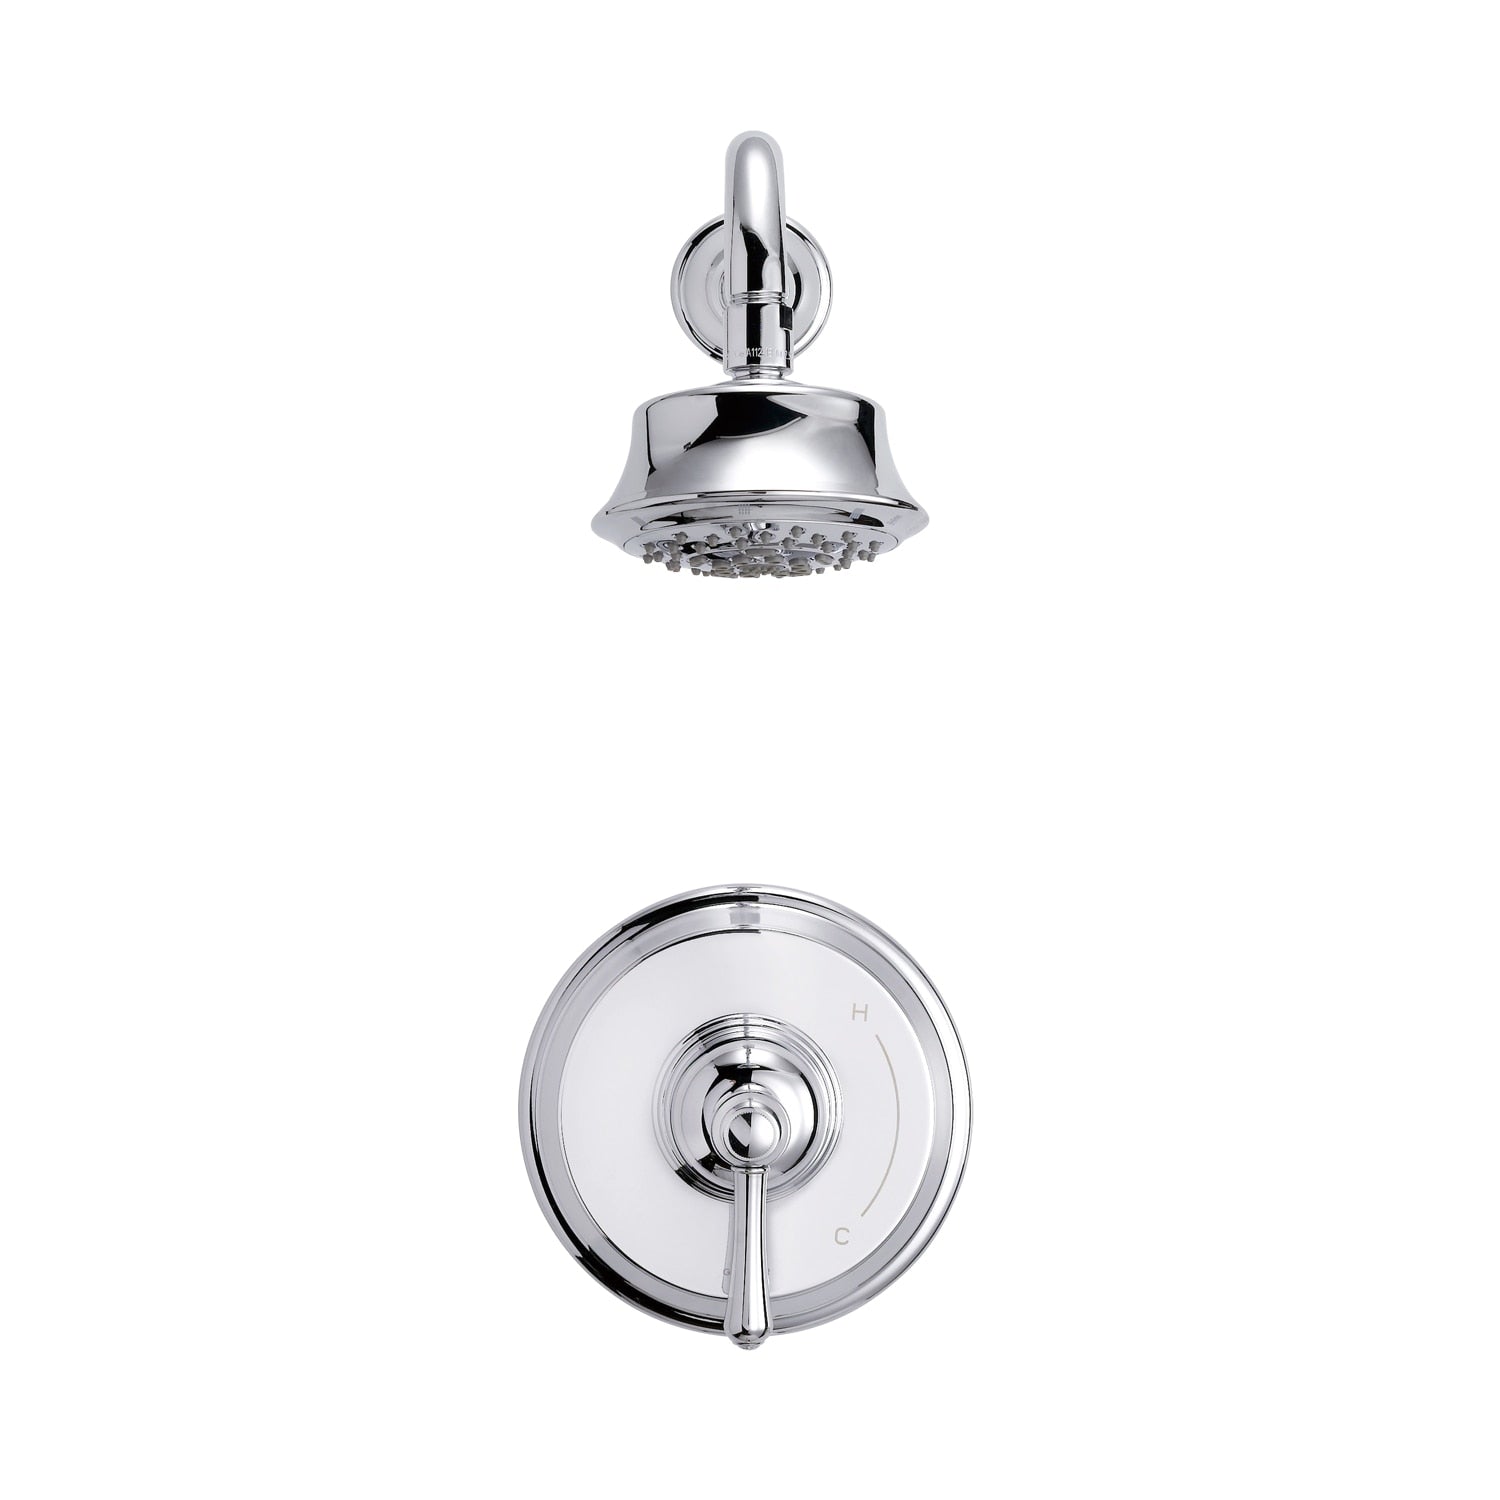 Danze by Gerber Opulence 1H Shower Only Trim Kit and Treysta Cartridge w/ 5 Function Showerhead 1.75gpm